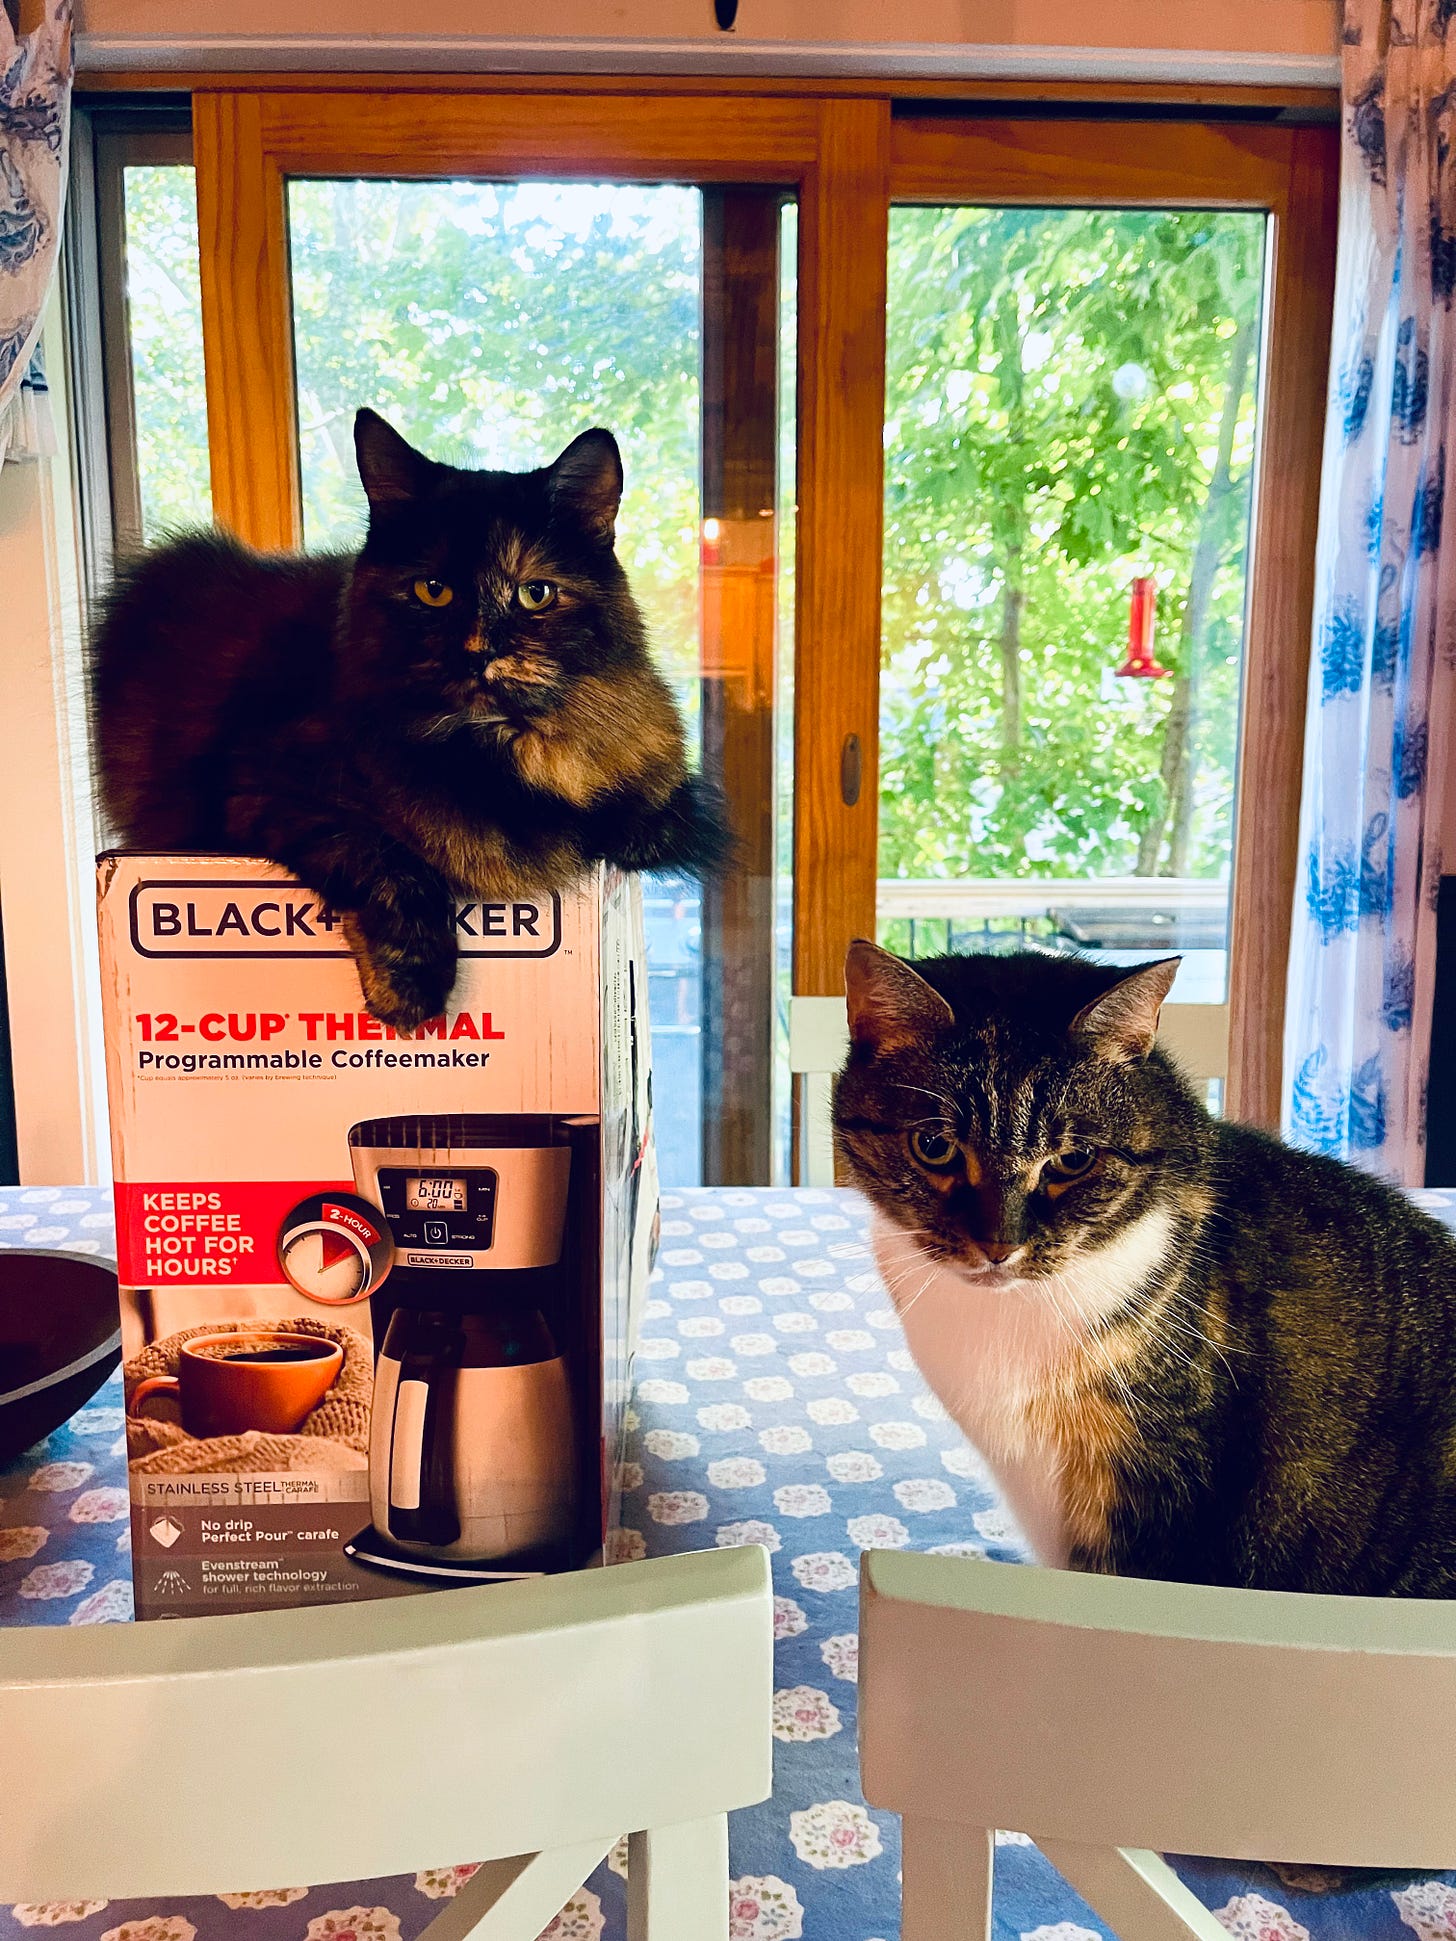 Two cats on a table. One is sitting on a coffee maker box